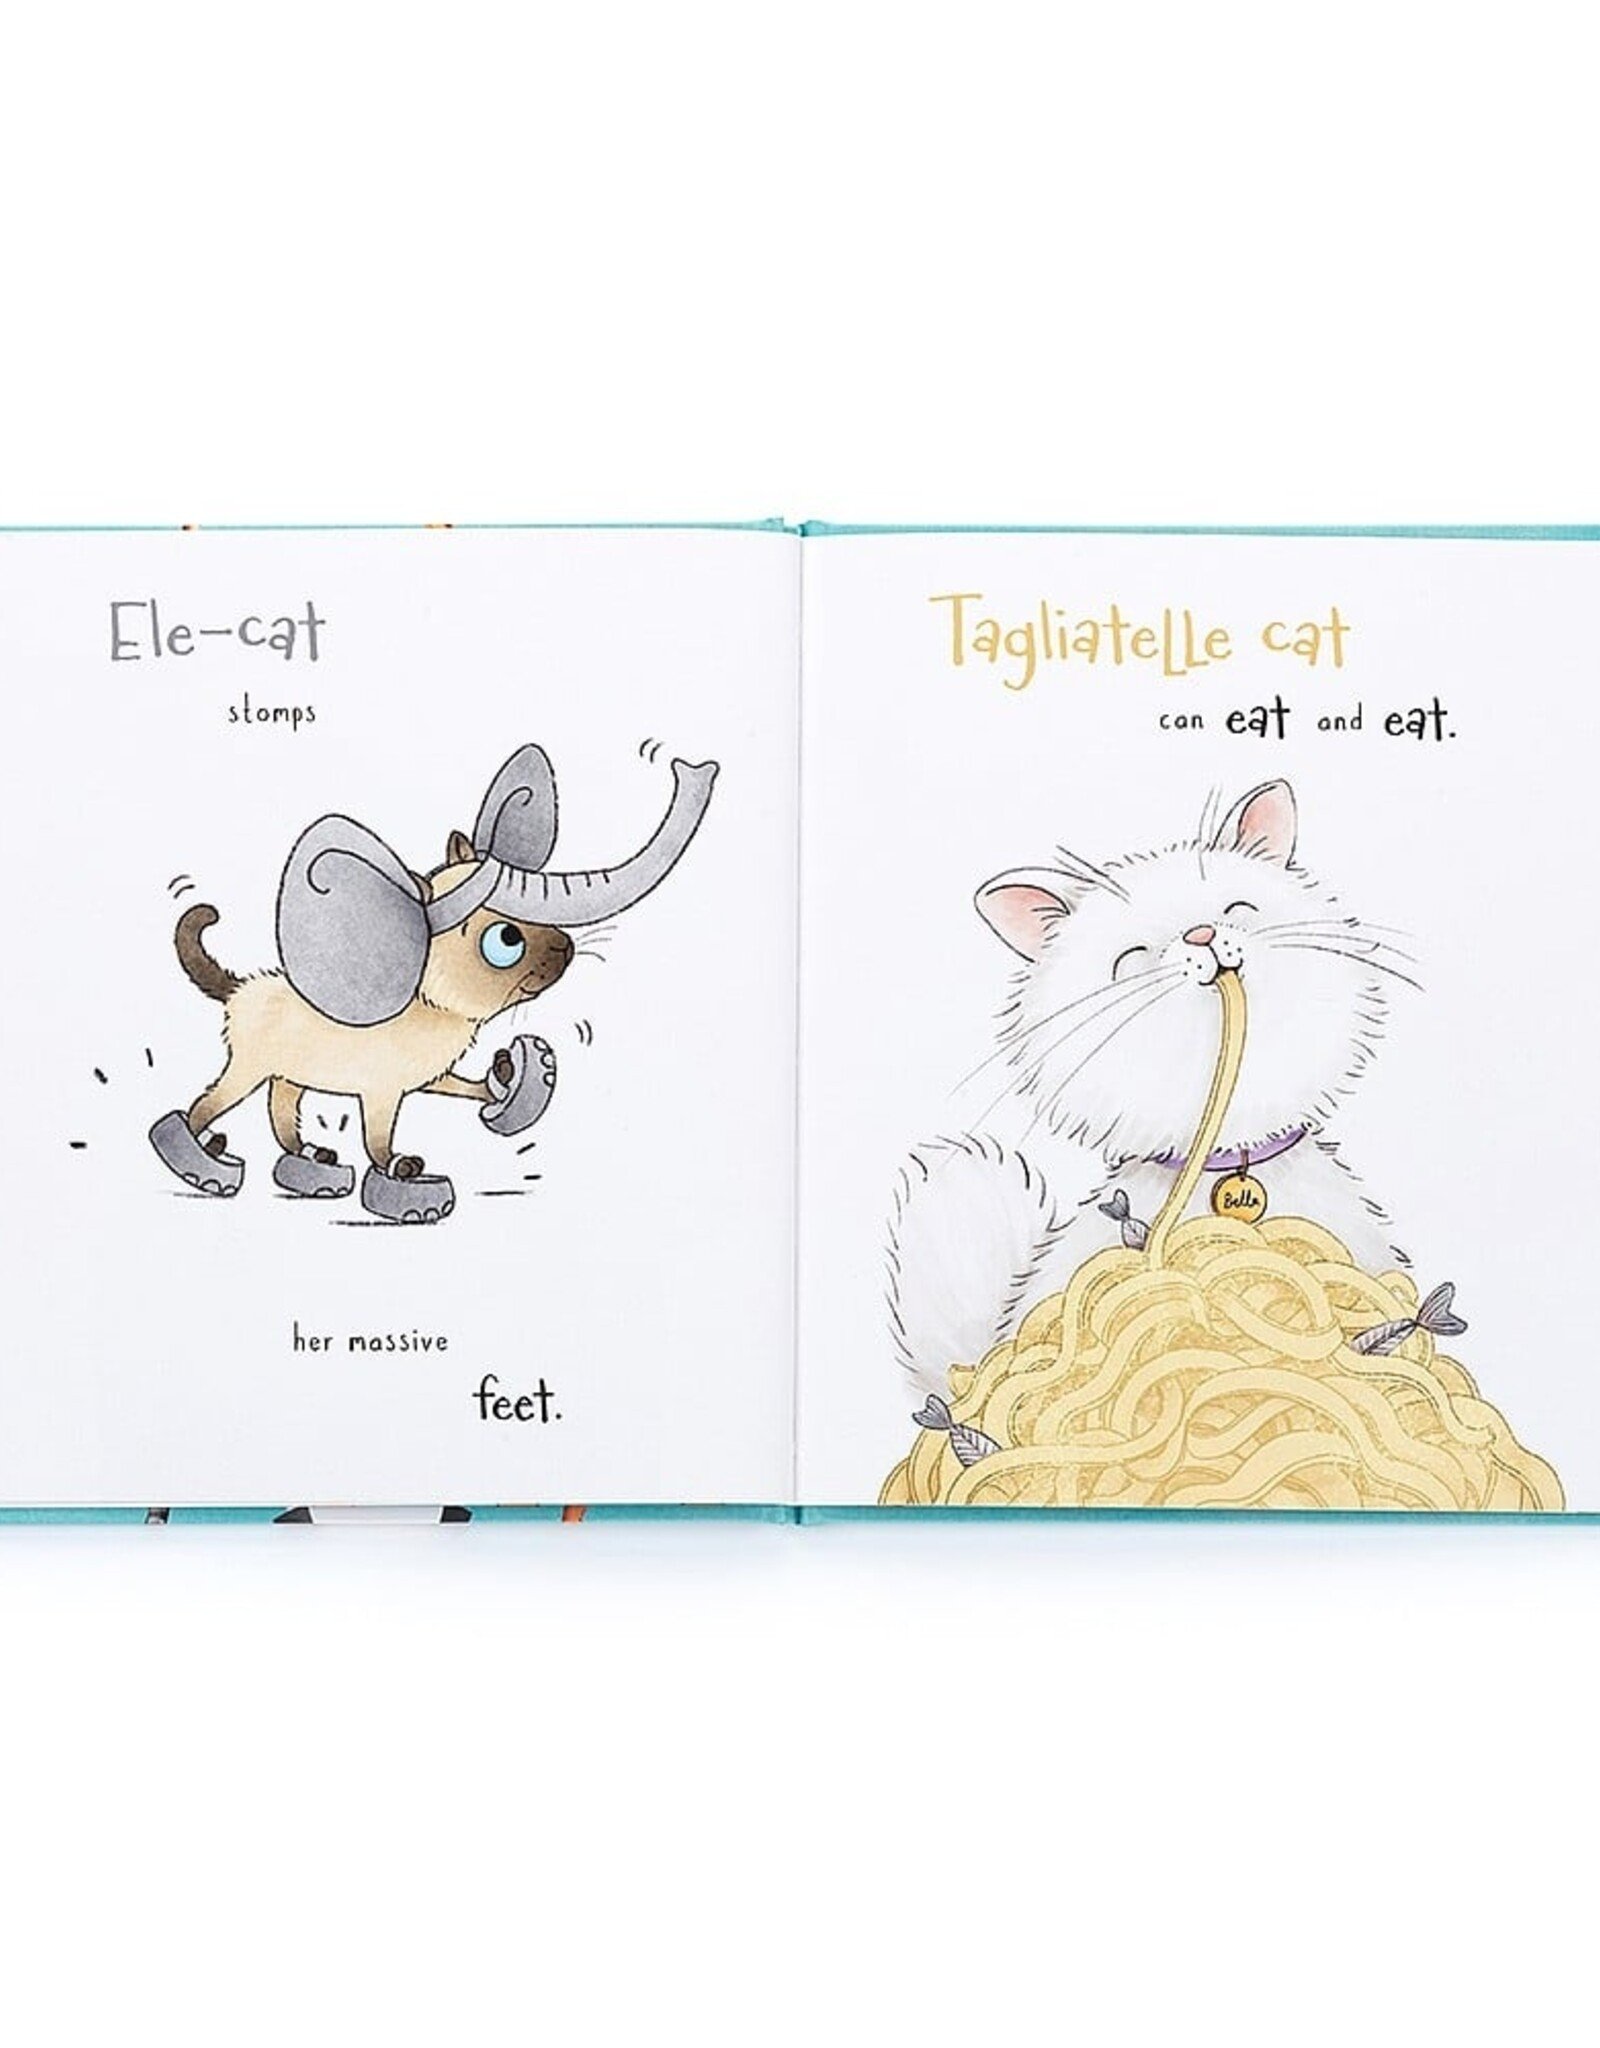 Jellycat All Kinds of Cats book